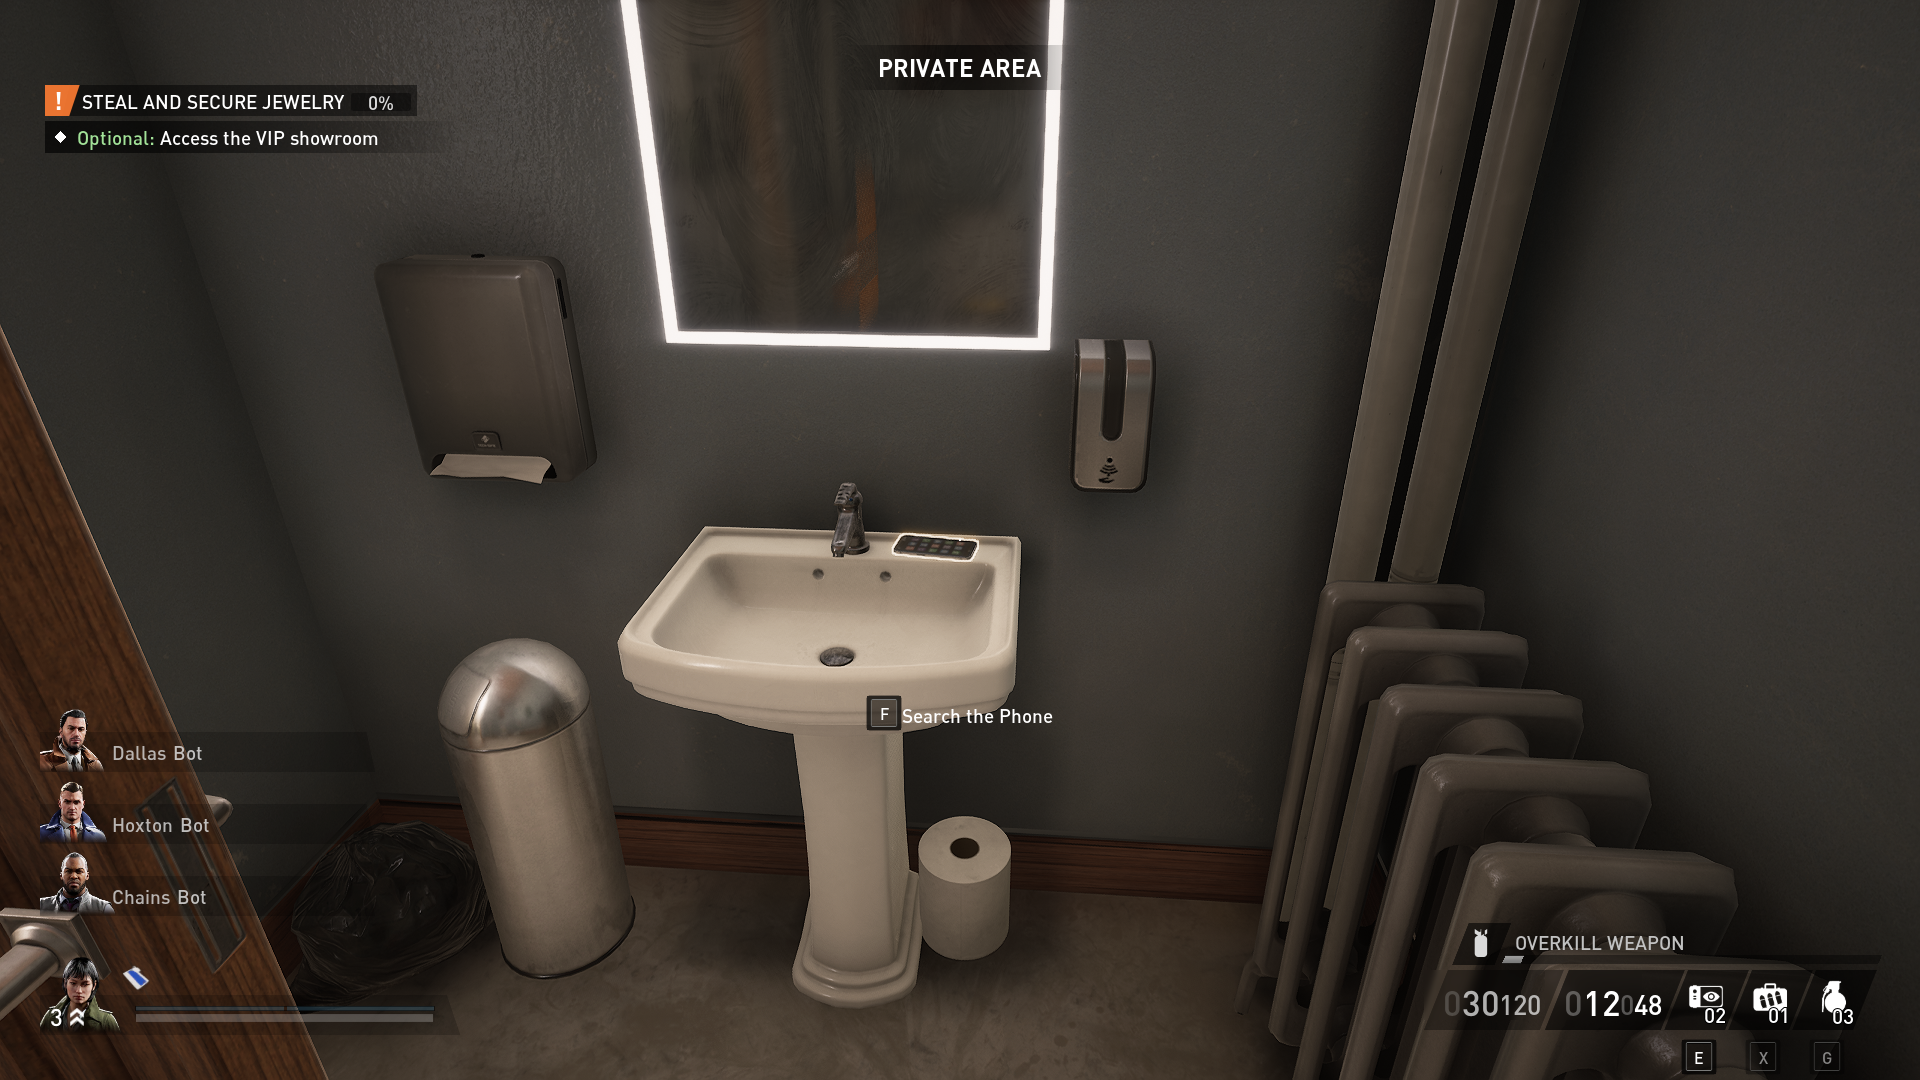 Displays the phone in the bathroom during Dirty Ice (Payday 3)